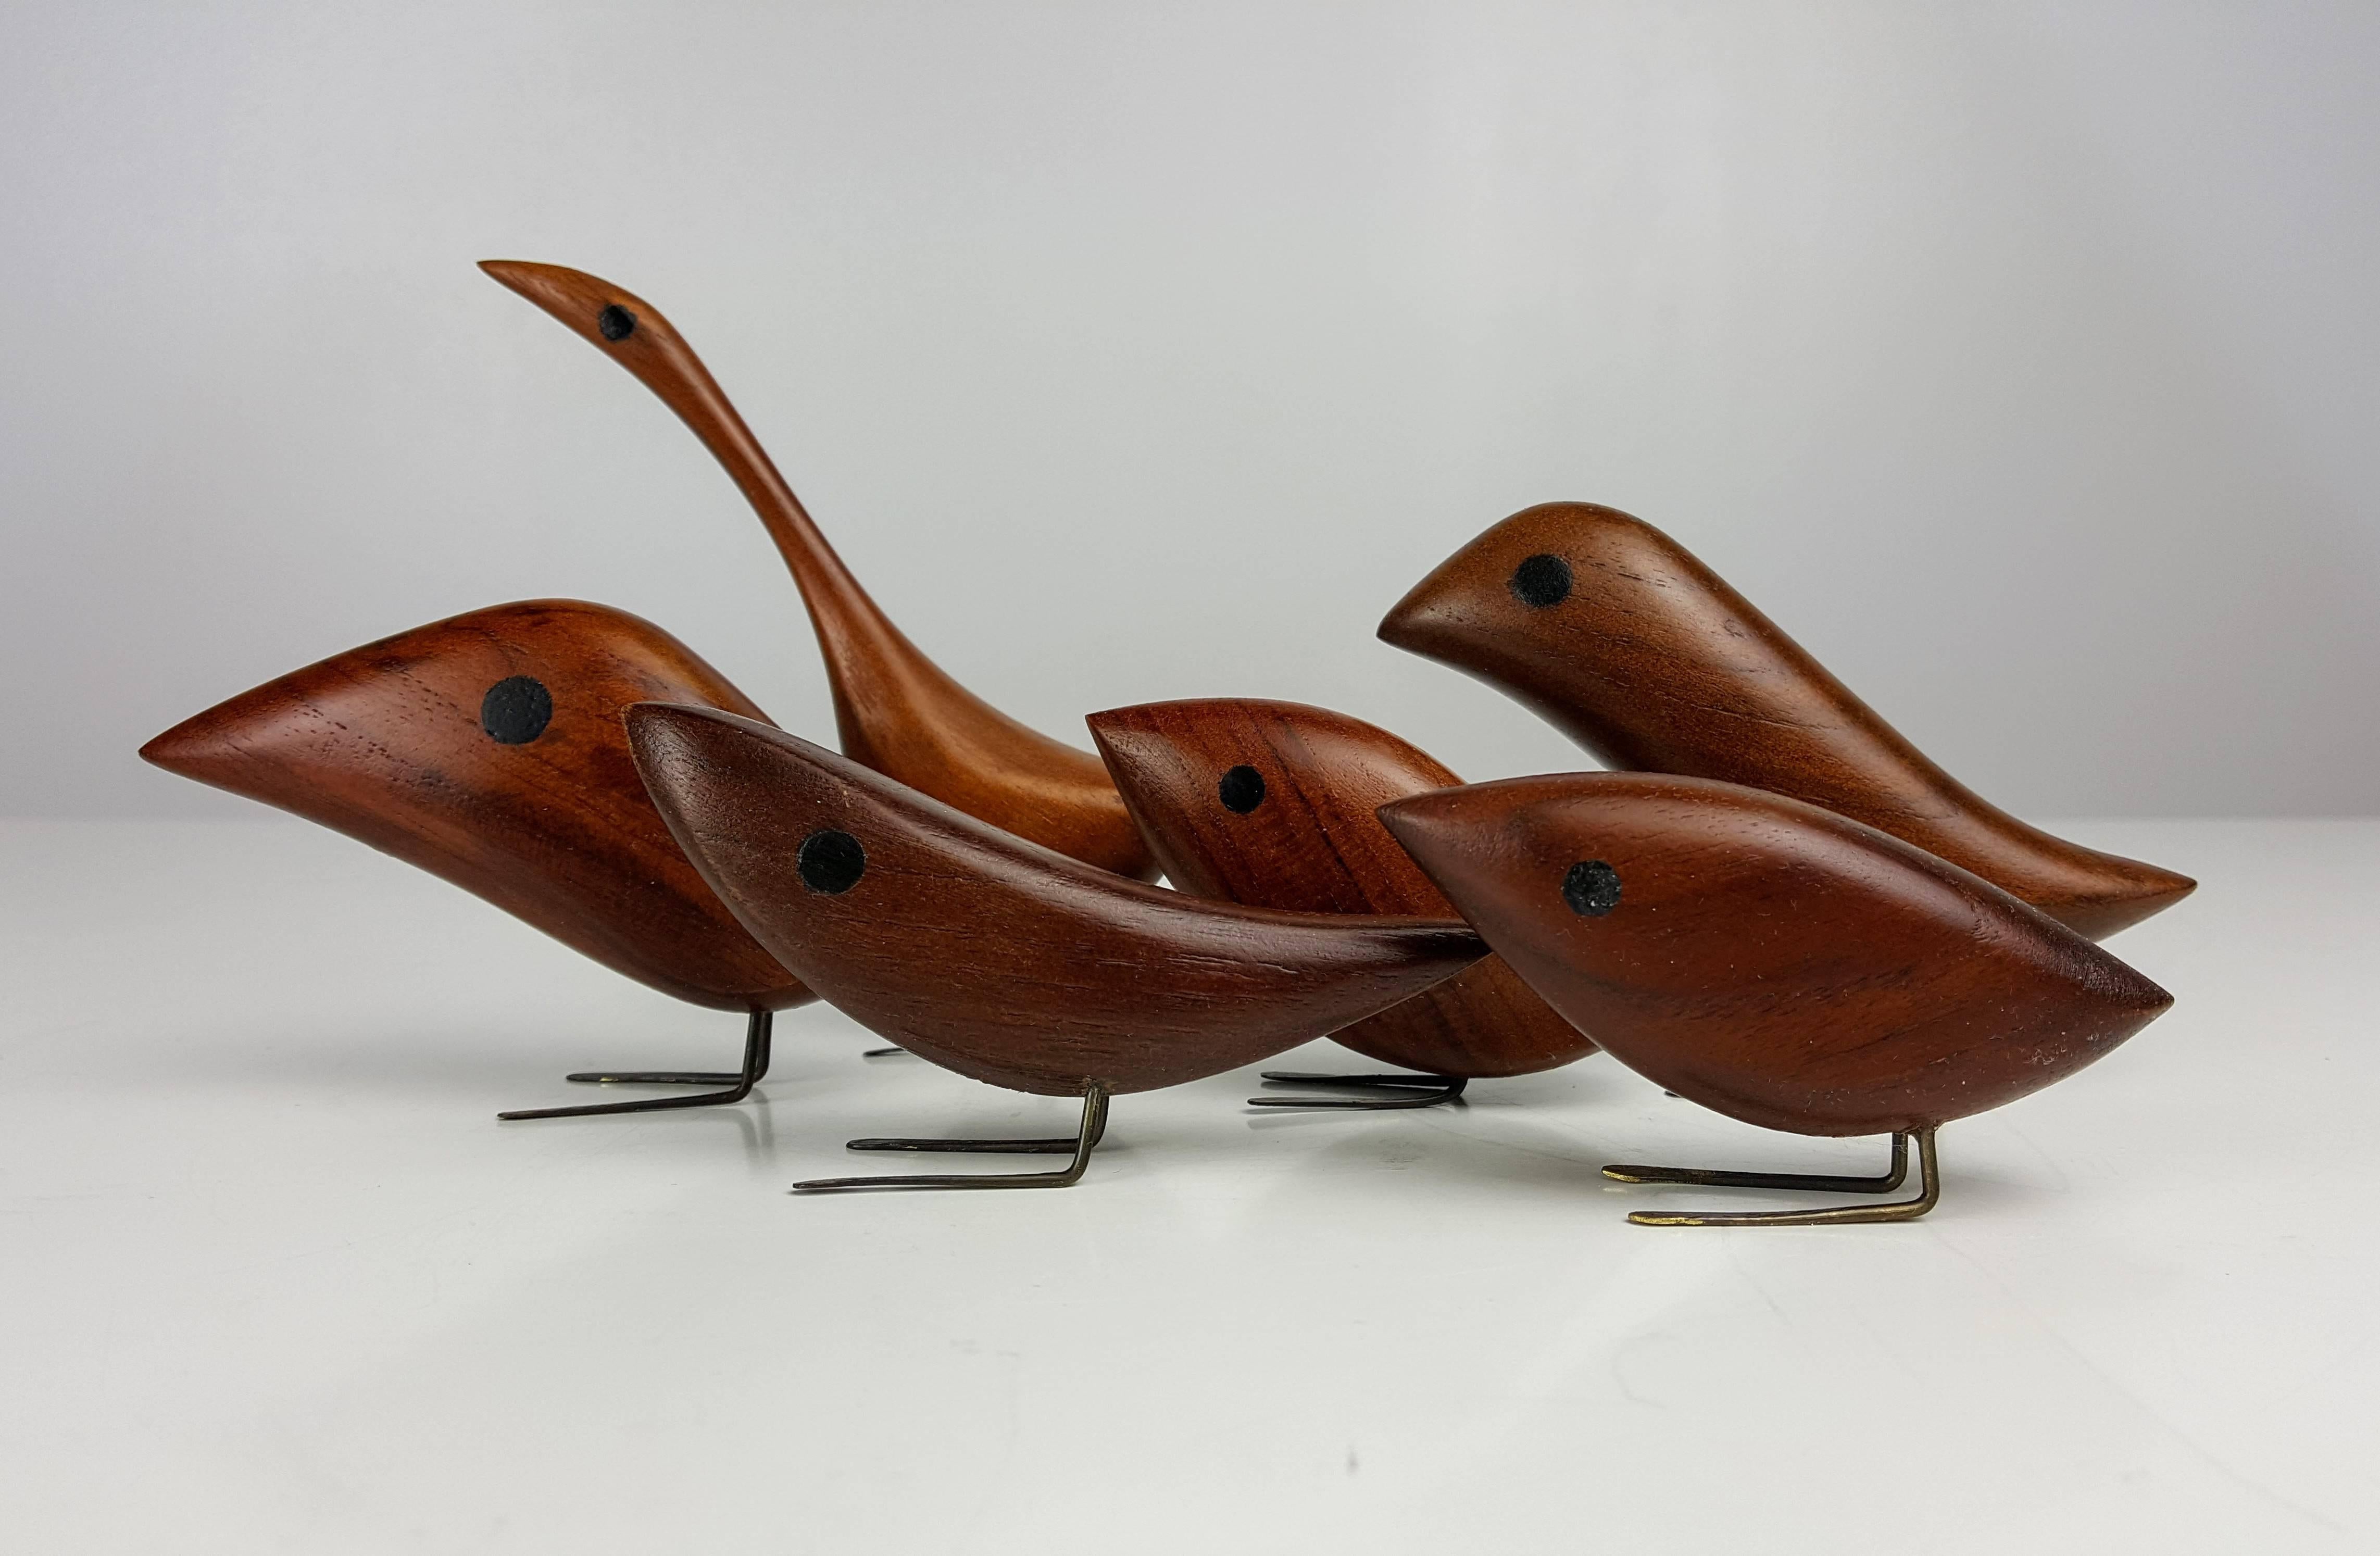 Grouping of teak bird sculptures by Jacob Hermann, Denmark, 1950s.

We offer free regular deliveries to NYC and Philadelphia area. Delivery to DC, MD, CT and MA are available if schedule permits, please message for a location-based delivery quote.